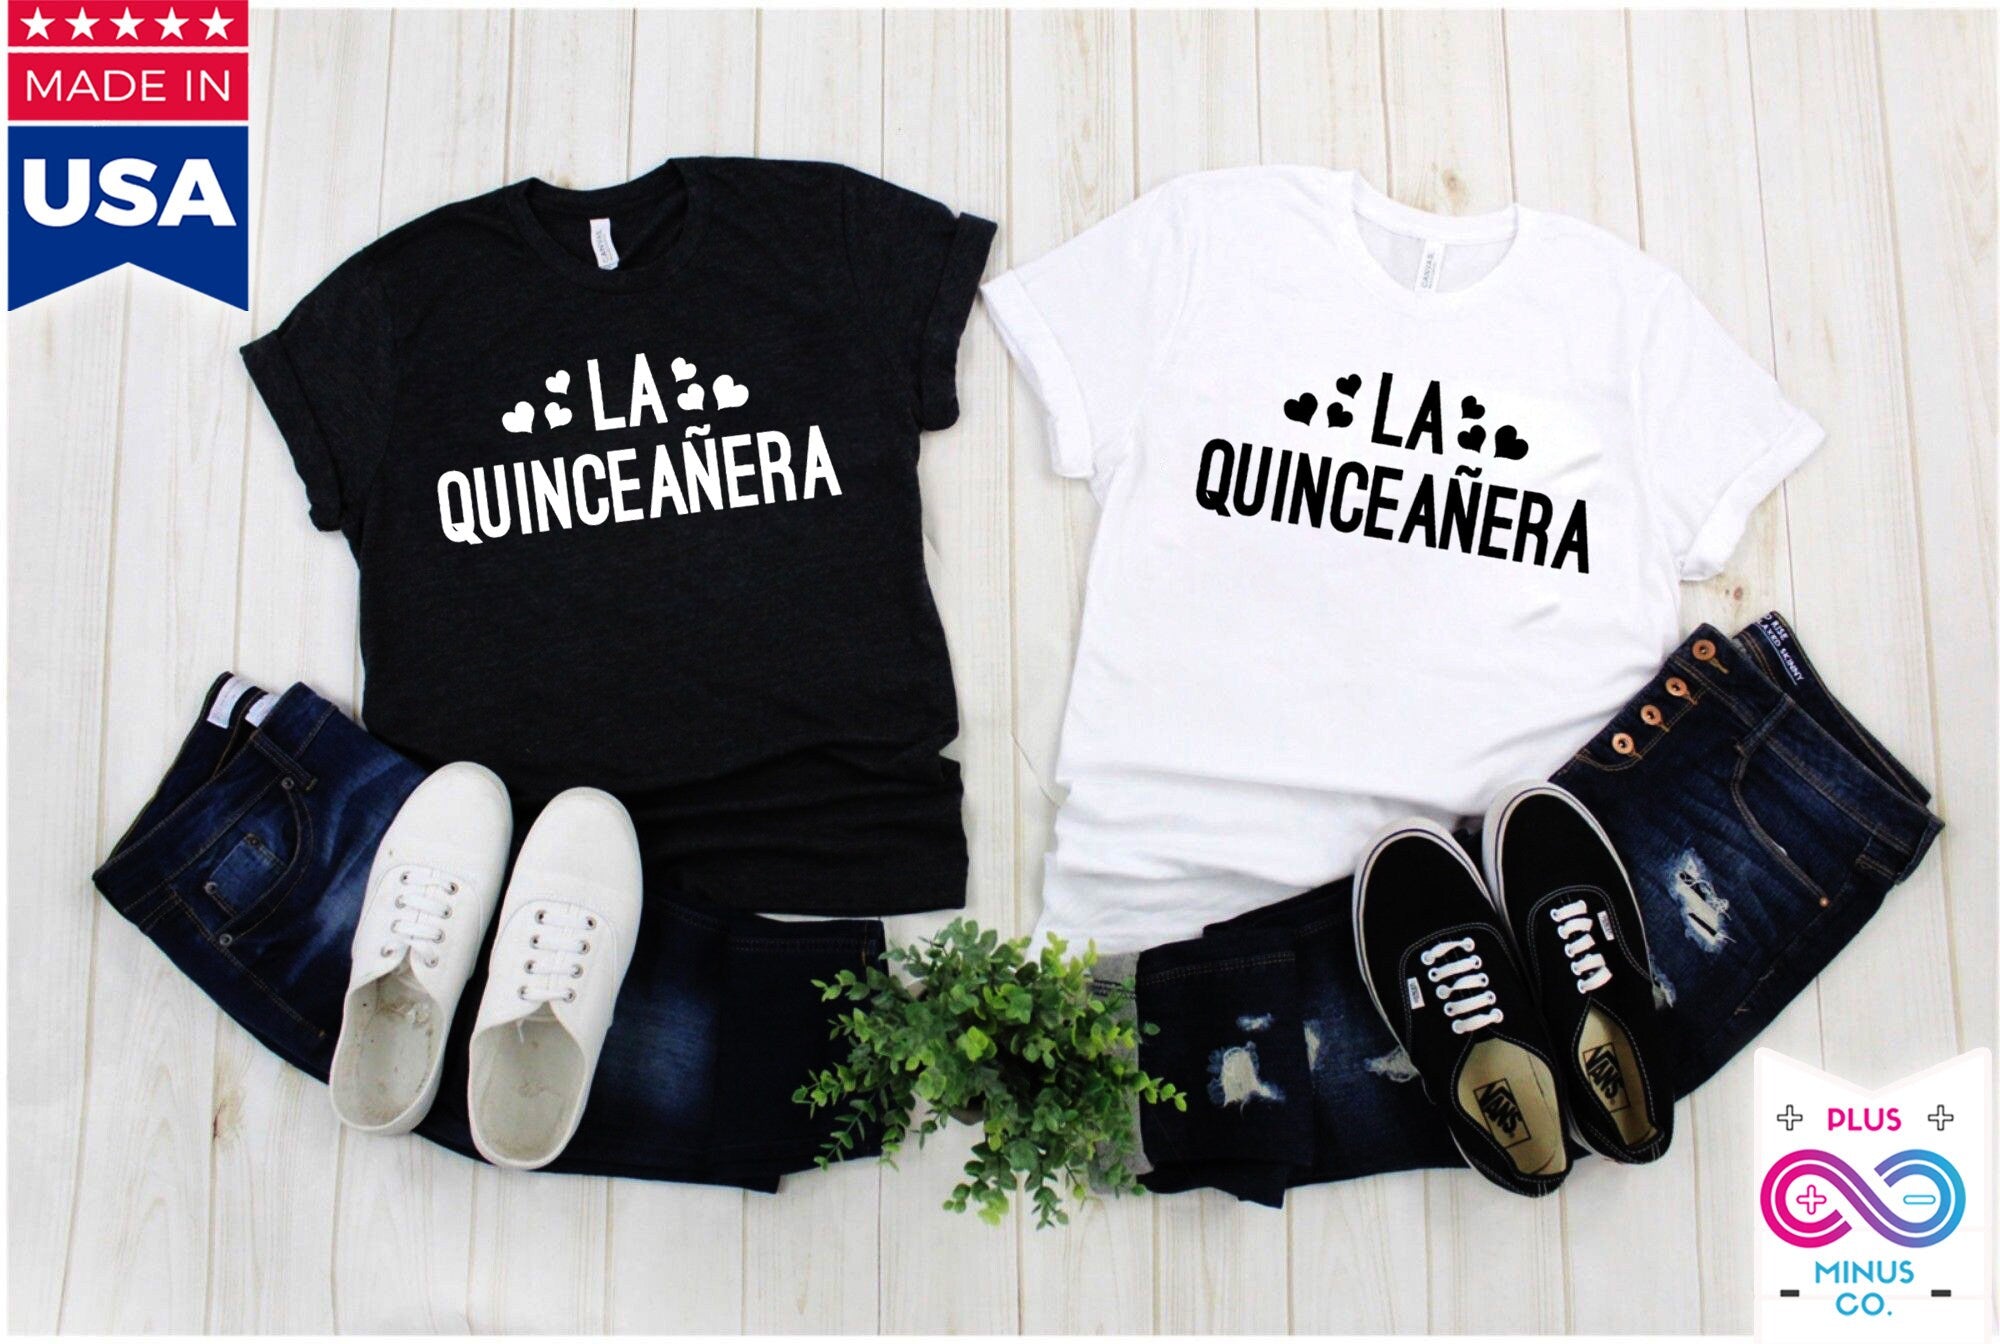 La Quinceañera Latina Spanish T-Shirts,Mexican Shirt Quinceanera Gift Rehersal Party Outfit, Quince Anos Party quince shirts - plusminusco.com